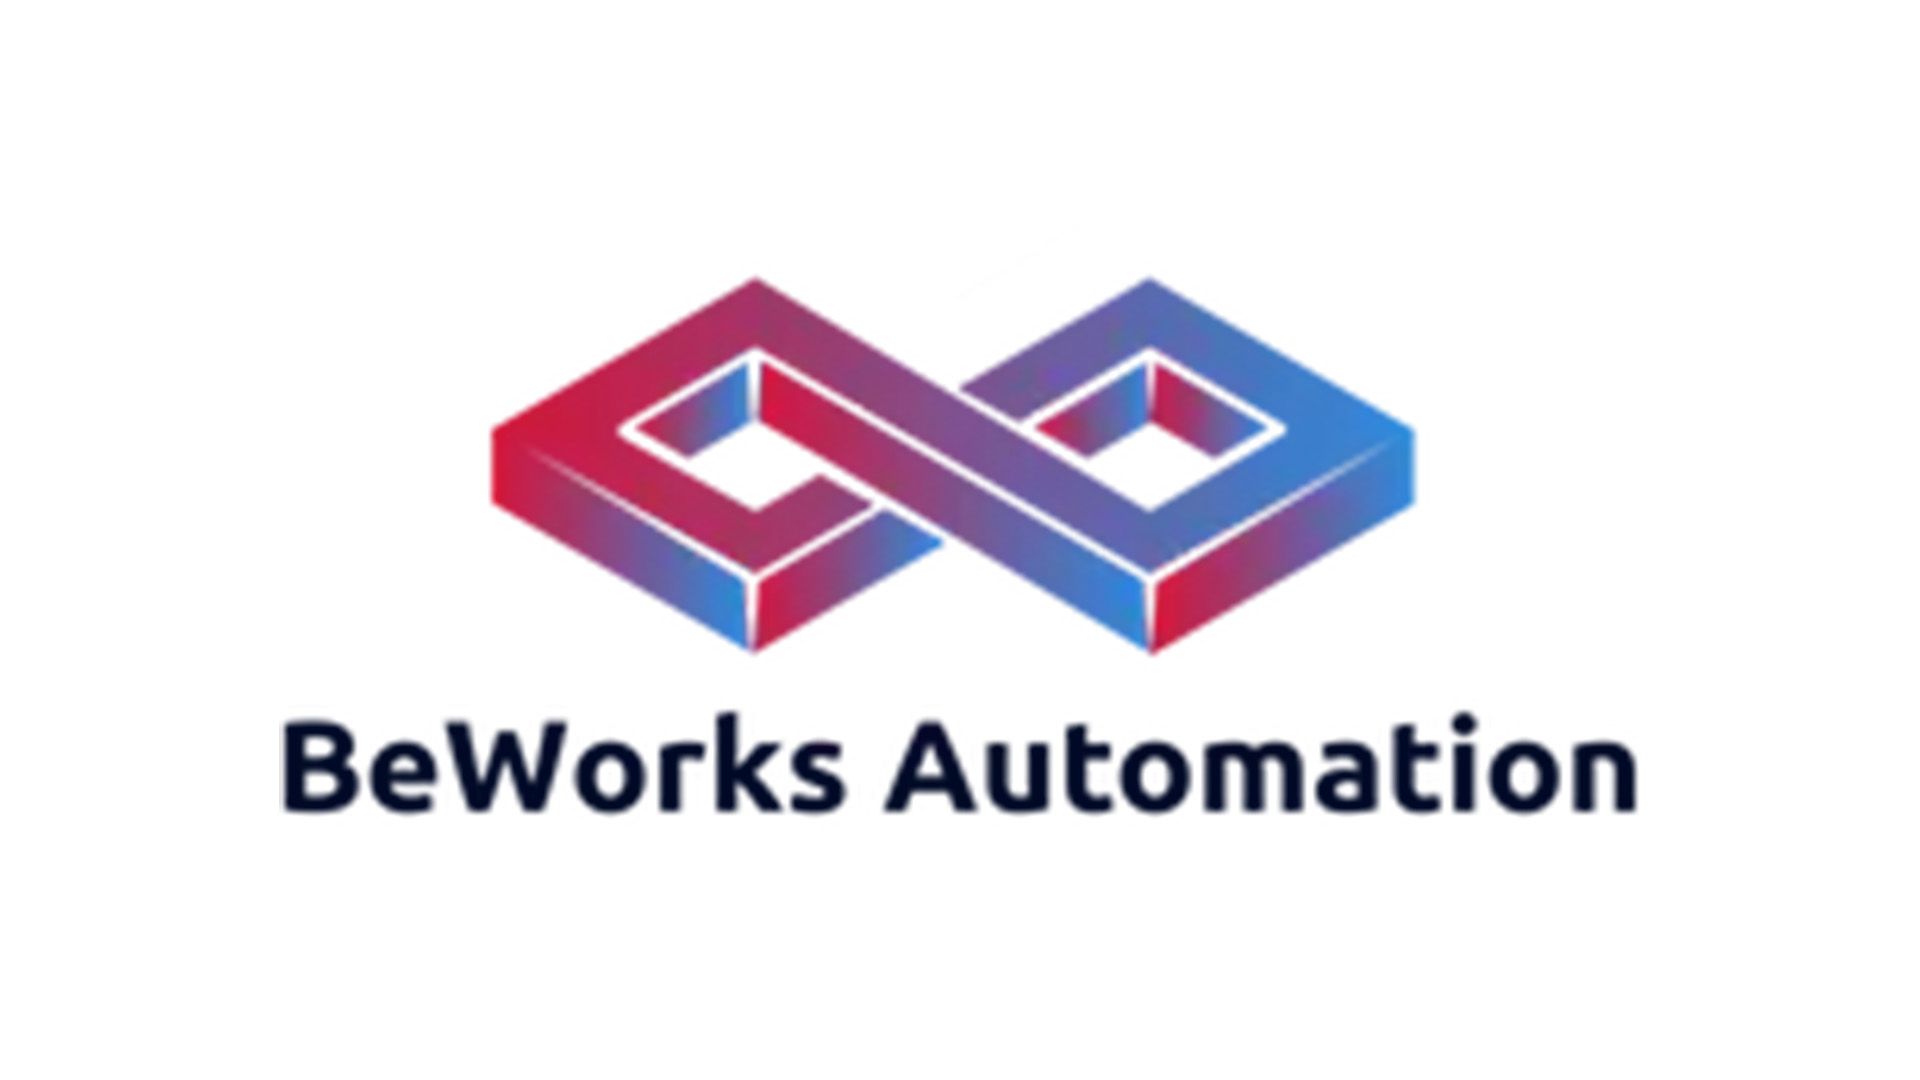 BeWorks Automation